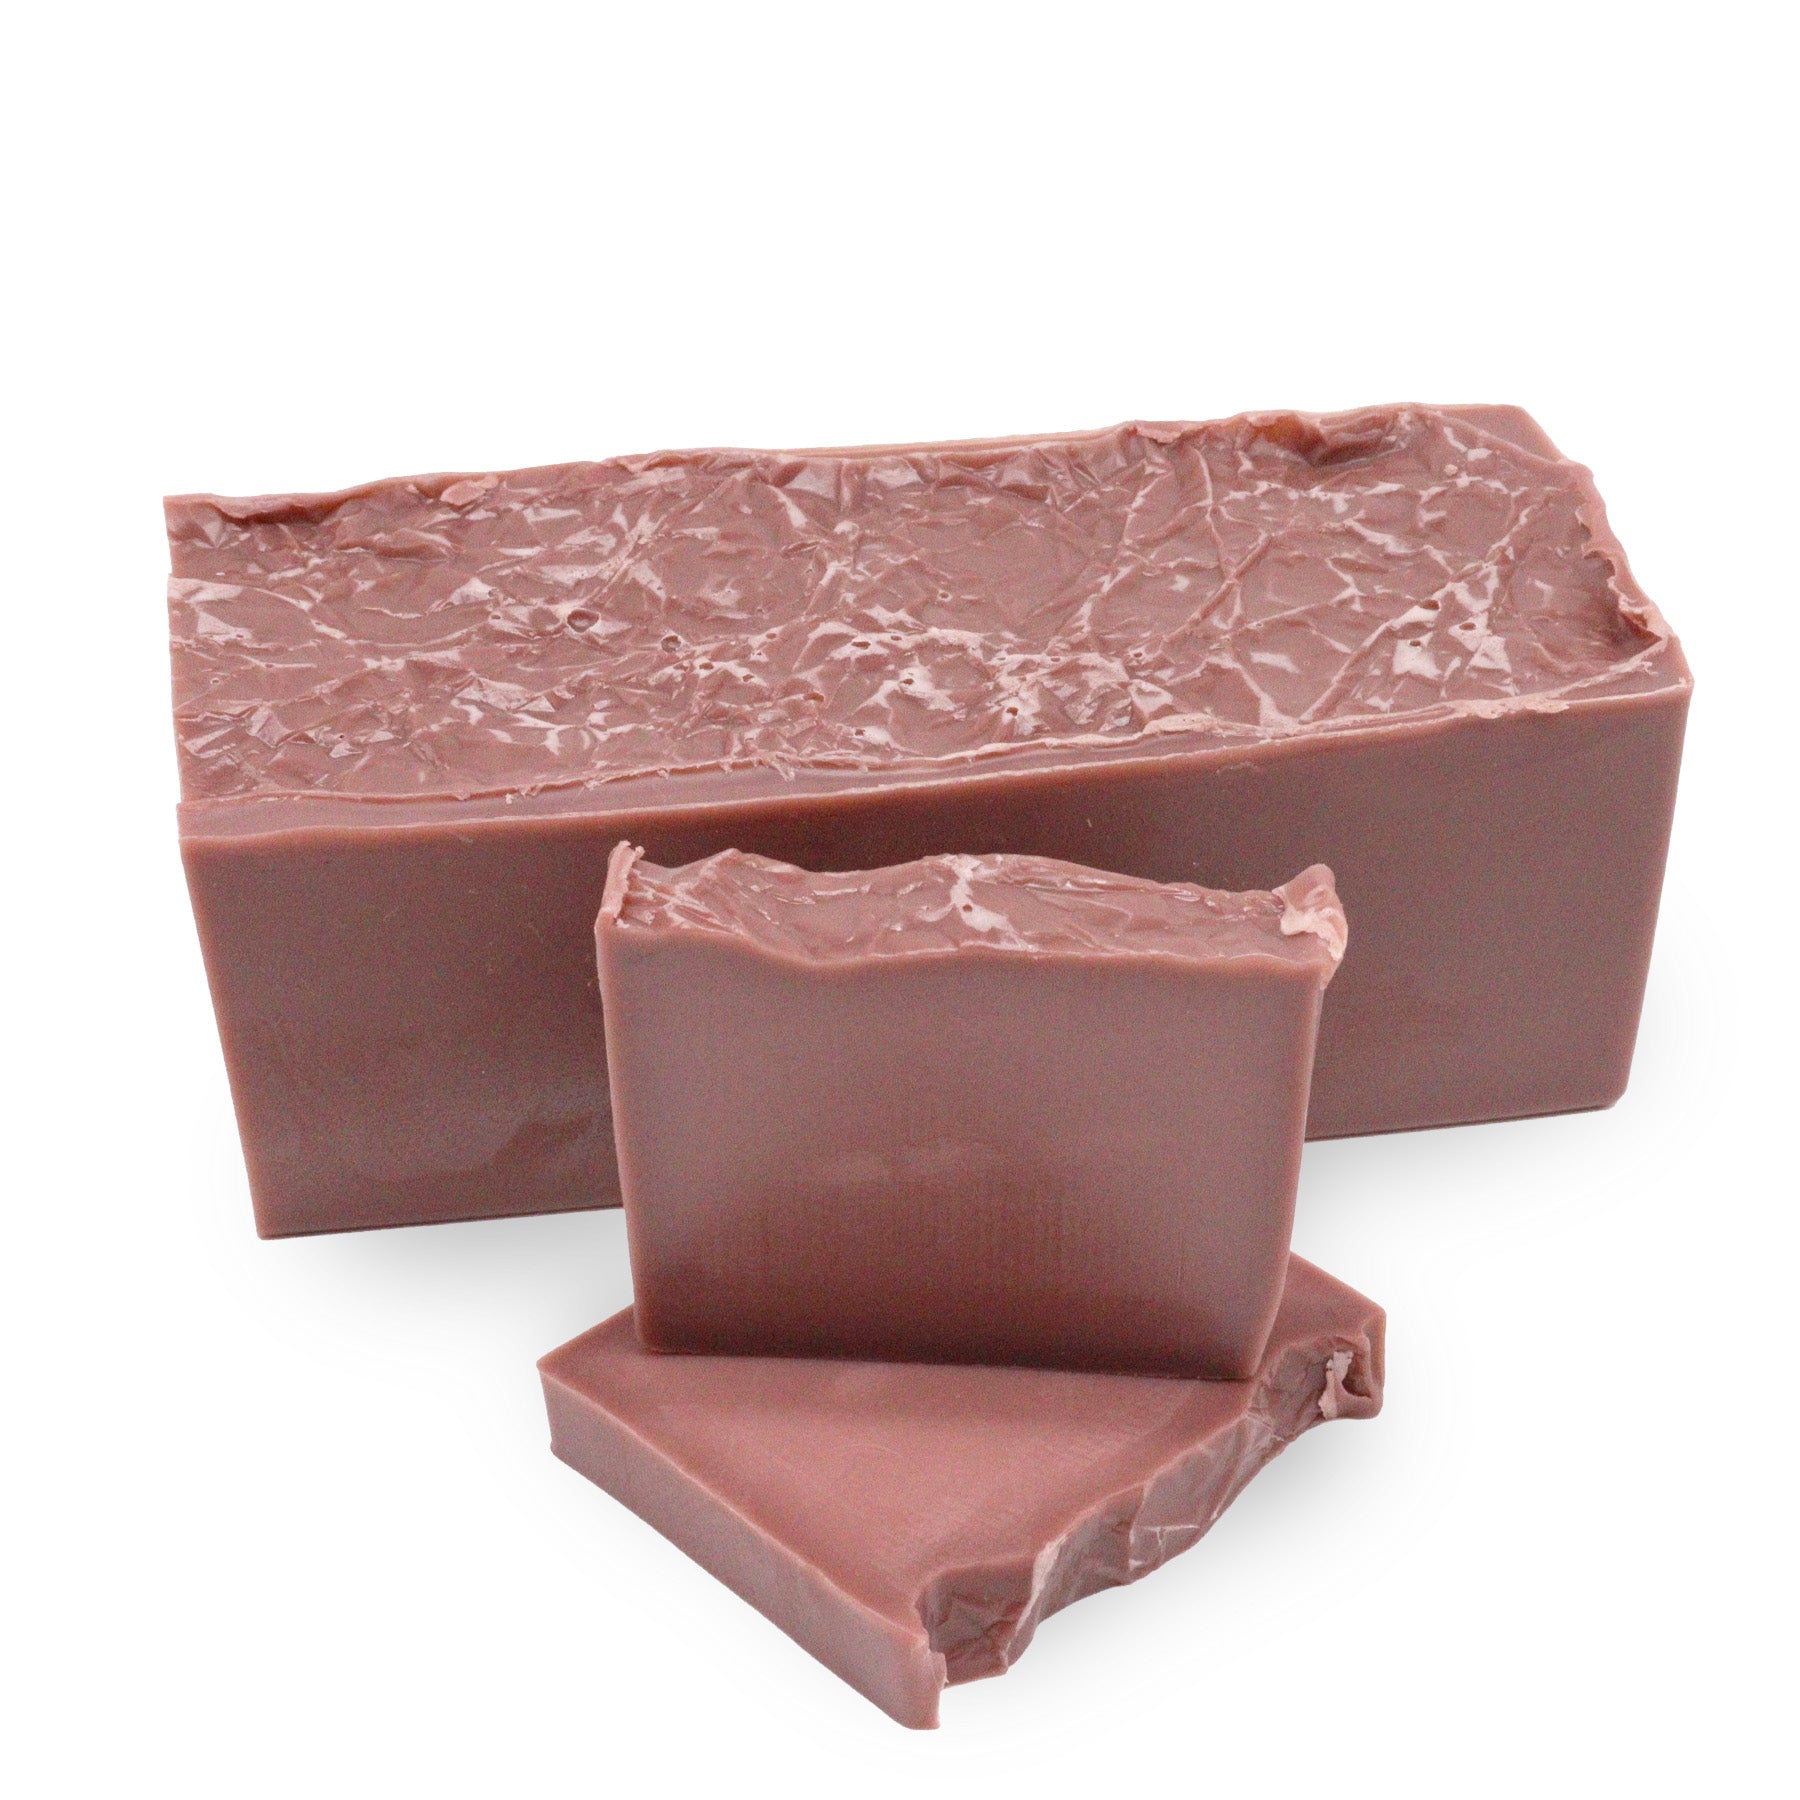 View Raspberry Bliss Soap Bar Approx 100g information